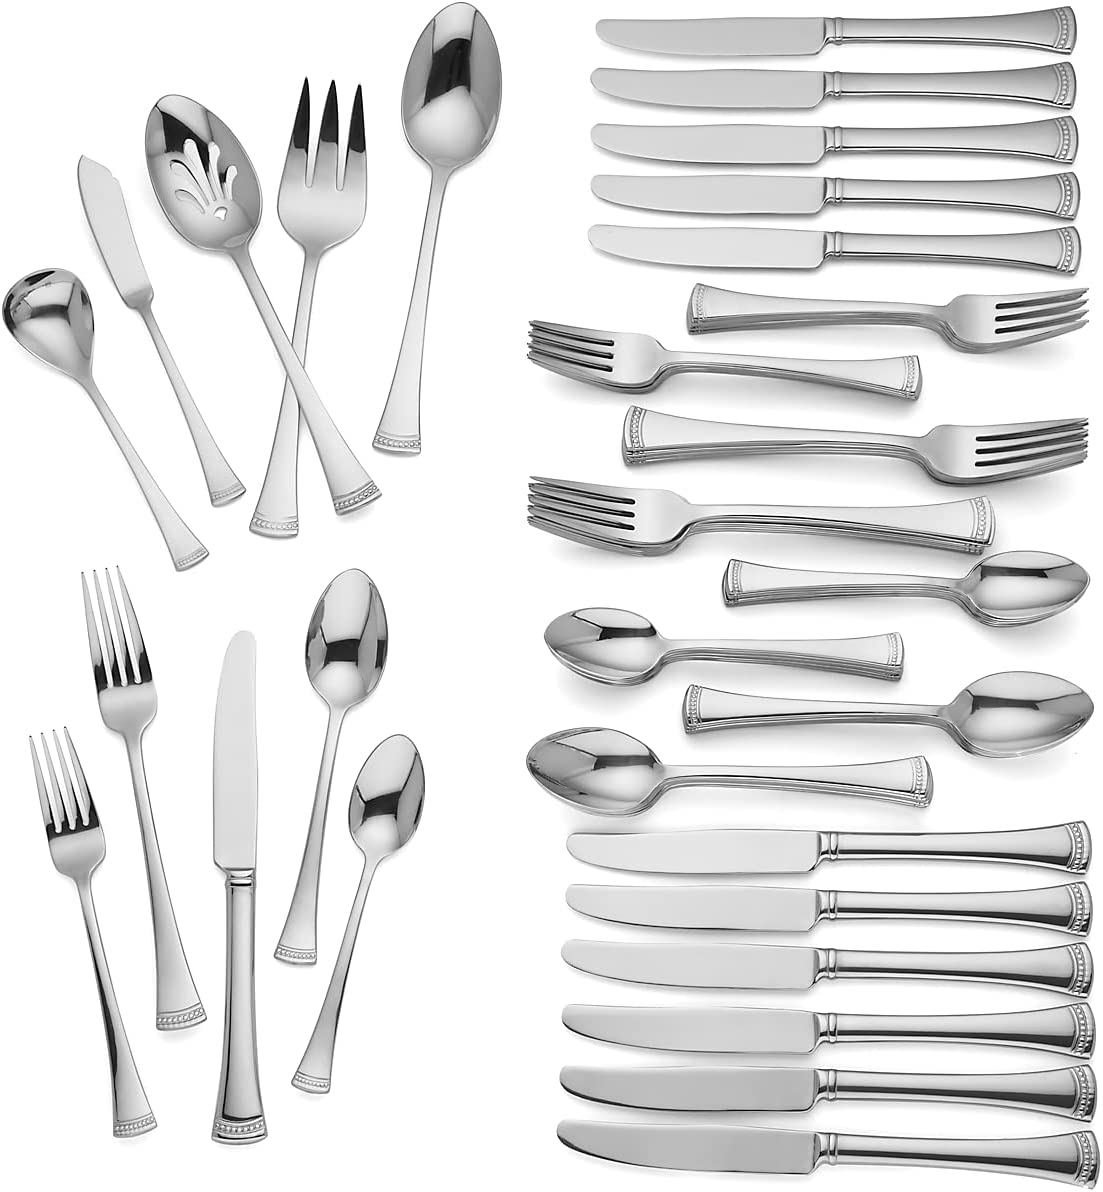 Lenox 65 Piece 18/10 Stainless Steel Flatware Set, Portola - Service for 12 (Includes 1 sugar spoon, 1 butter serving knife, 1 cold meat fork, 1 tablespoon and 1 pierced tablespoon)